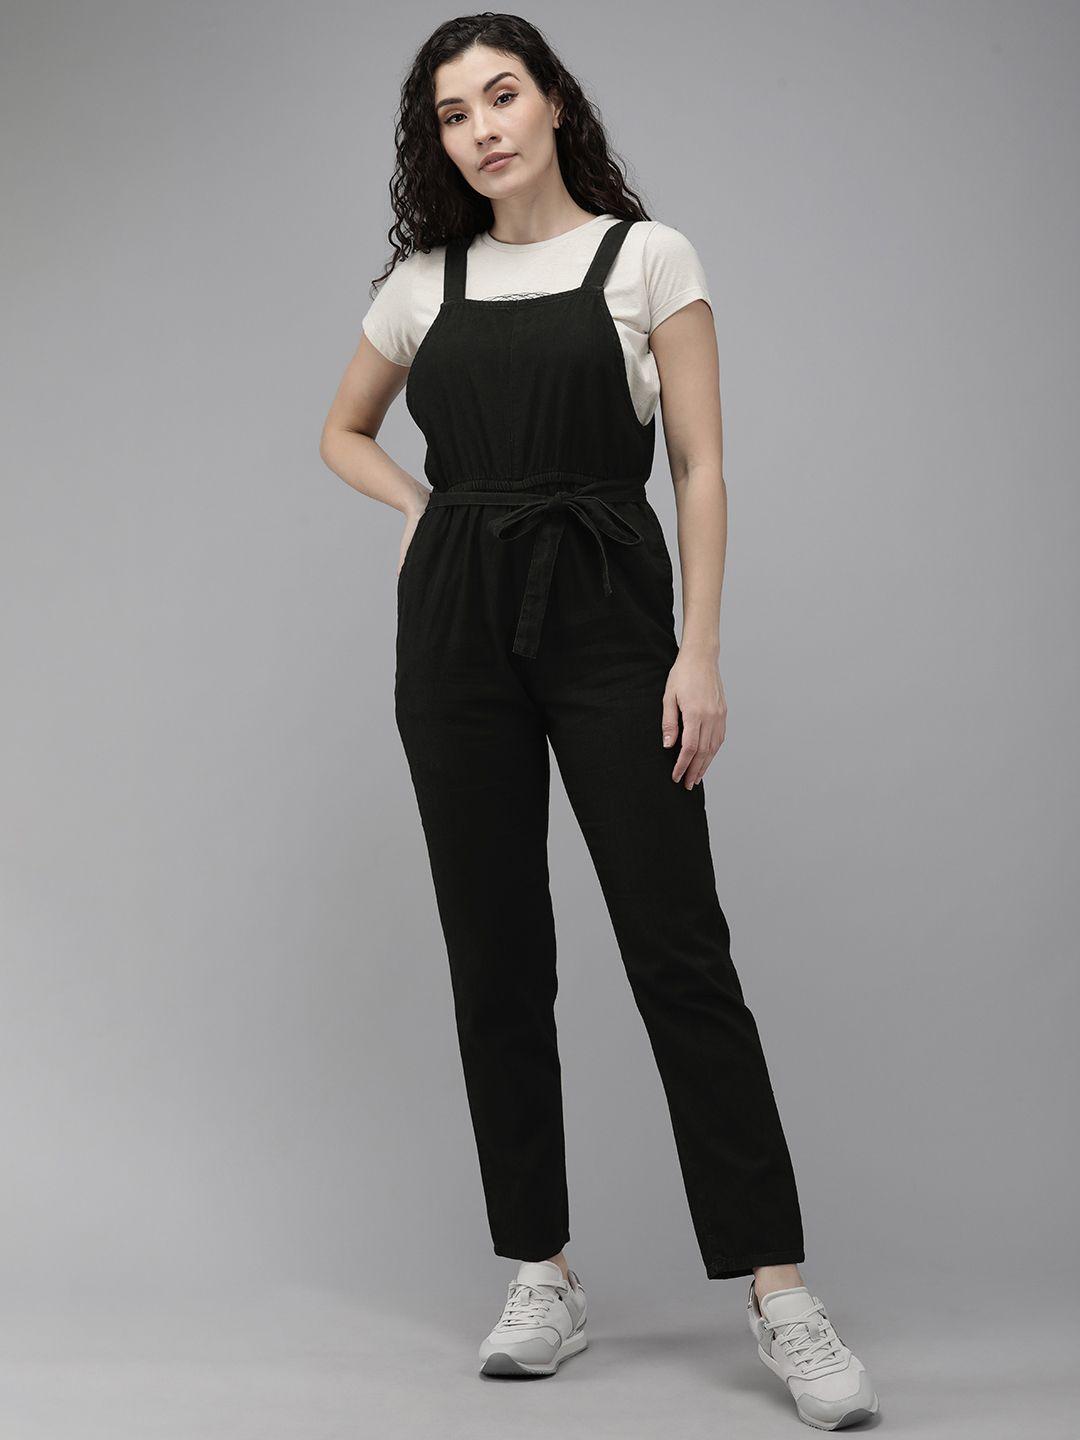 the roadster lifestyle co black basic jumpsuit